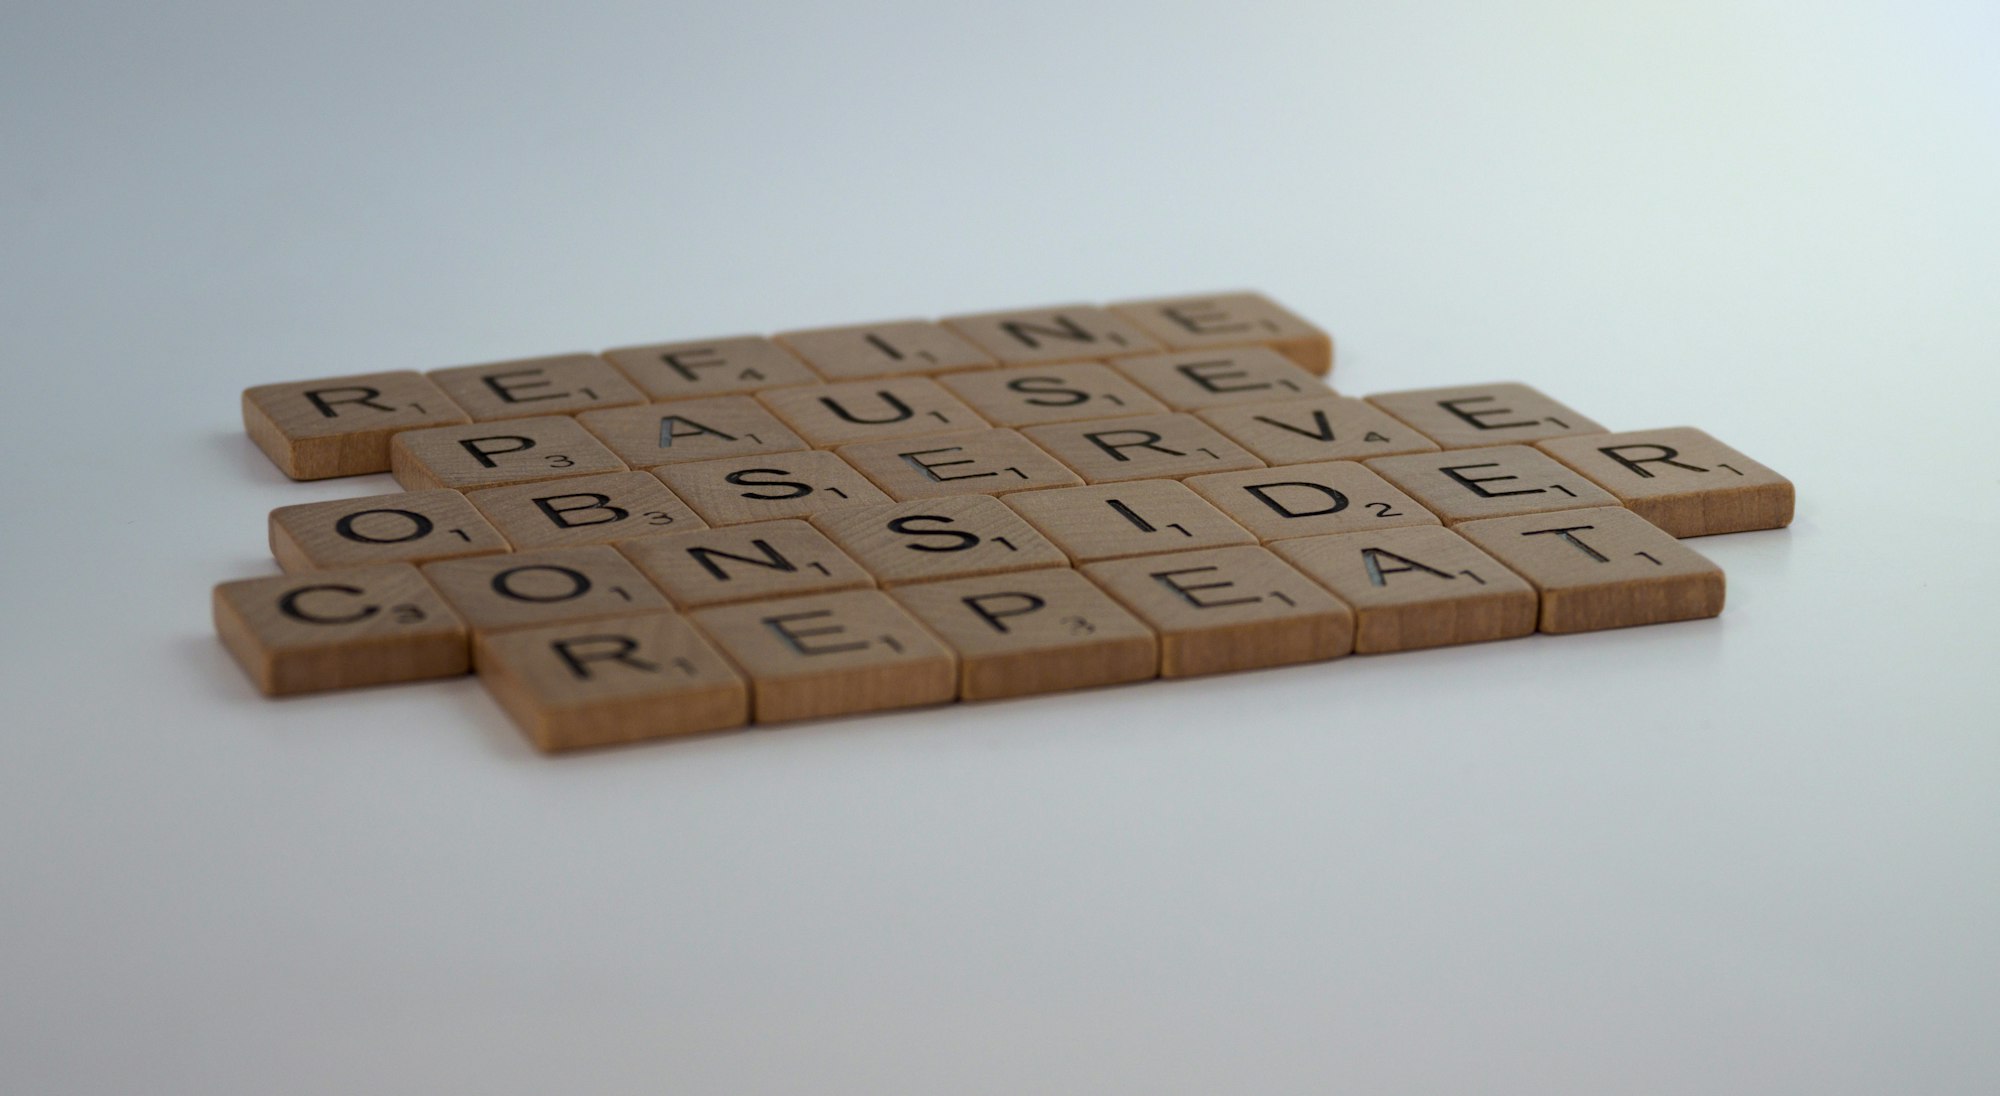 scrabble, scrabble pieces, lettering, letters, white background, wood, scrabble tiles, wood, words, refine, pause, observe, consider, repeat, creative process, create, think, don't rush, repetition, iteration, iterative, 

